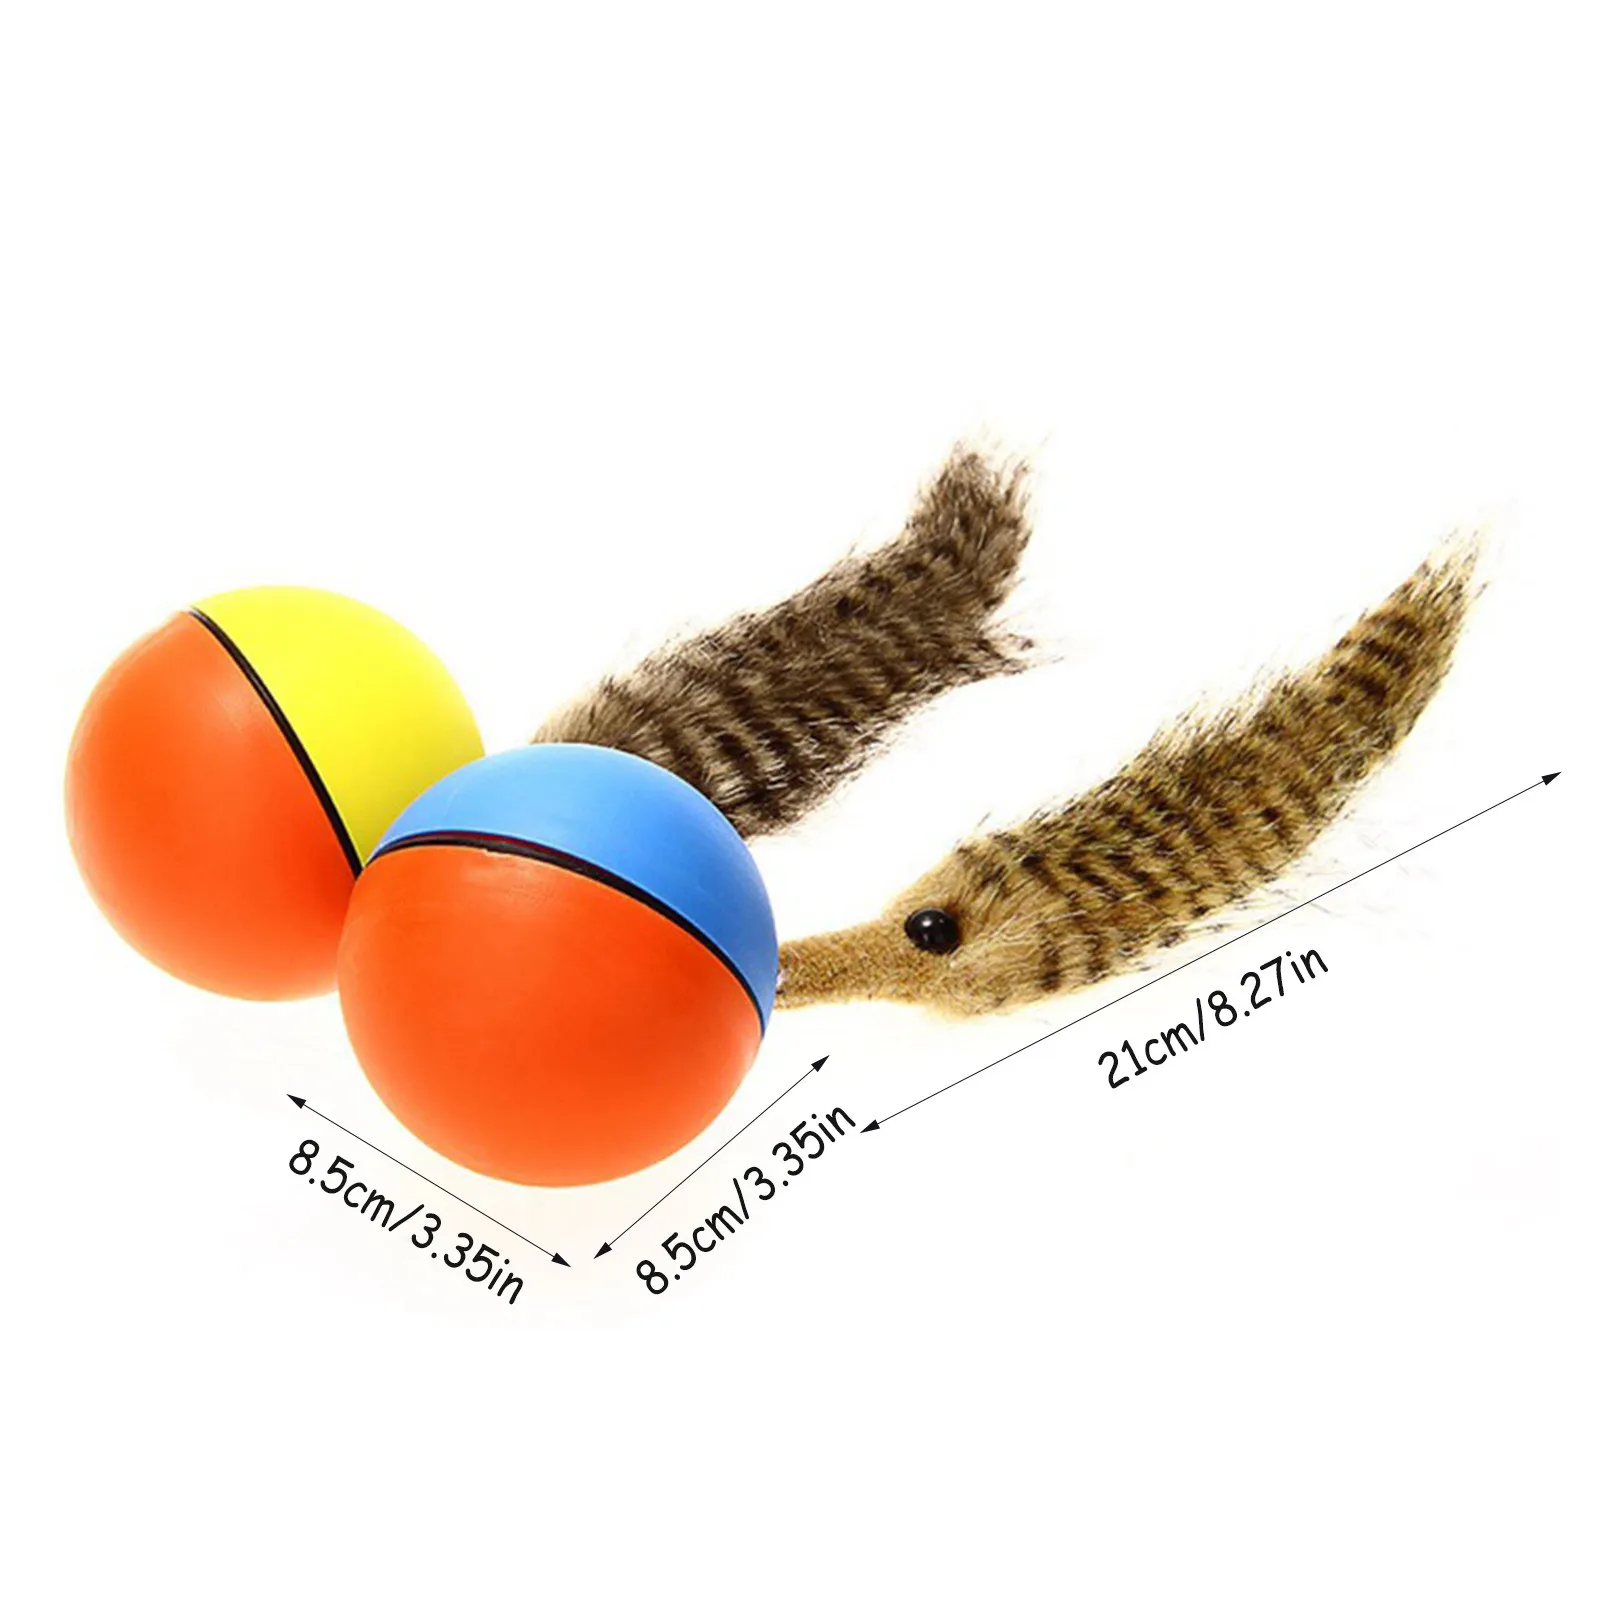 https://ae01.alicdn.com/kf/H43604ea8706a431089b841a2991ac1cdV/Pet-Ball-Toy-Dog-Weasel-Motorized-Funny-Rolling-Ball-Cat-Chasing-Jump-Toys-for-Pets-Kids.jpg